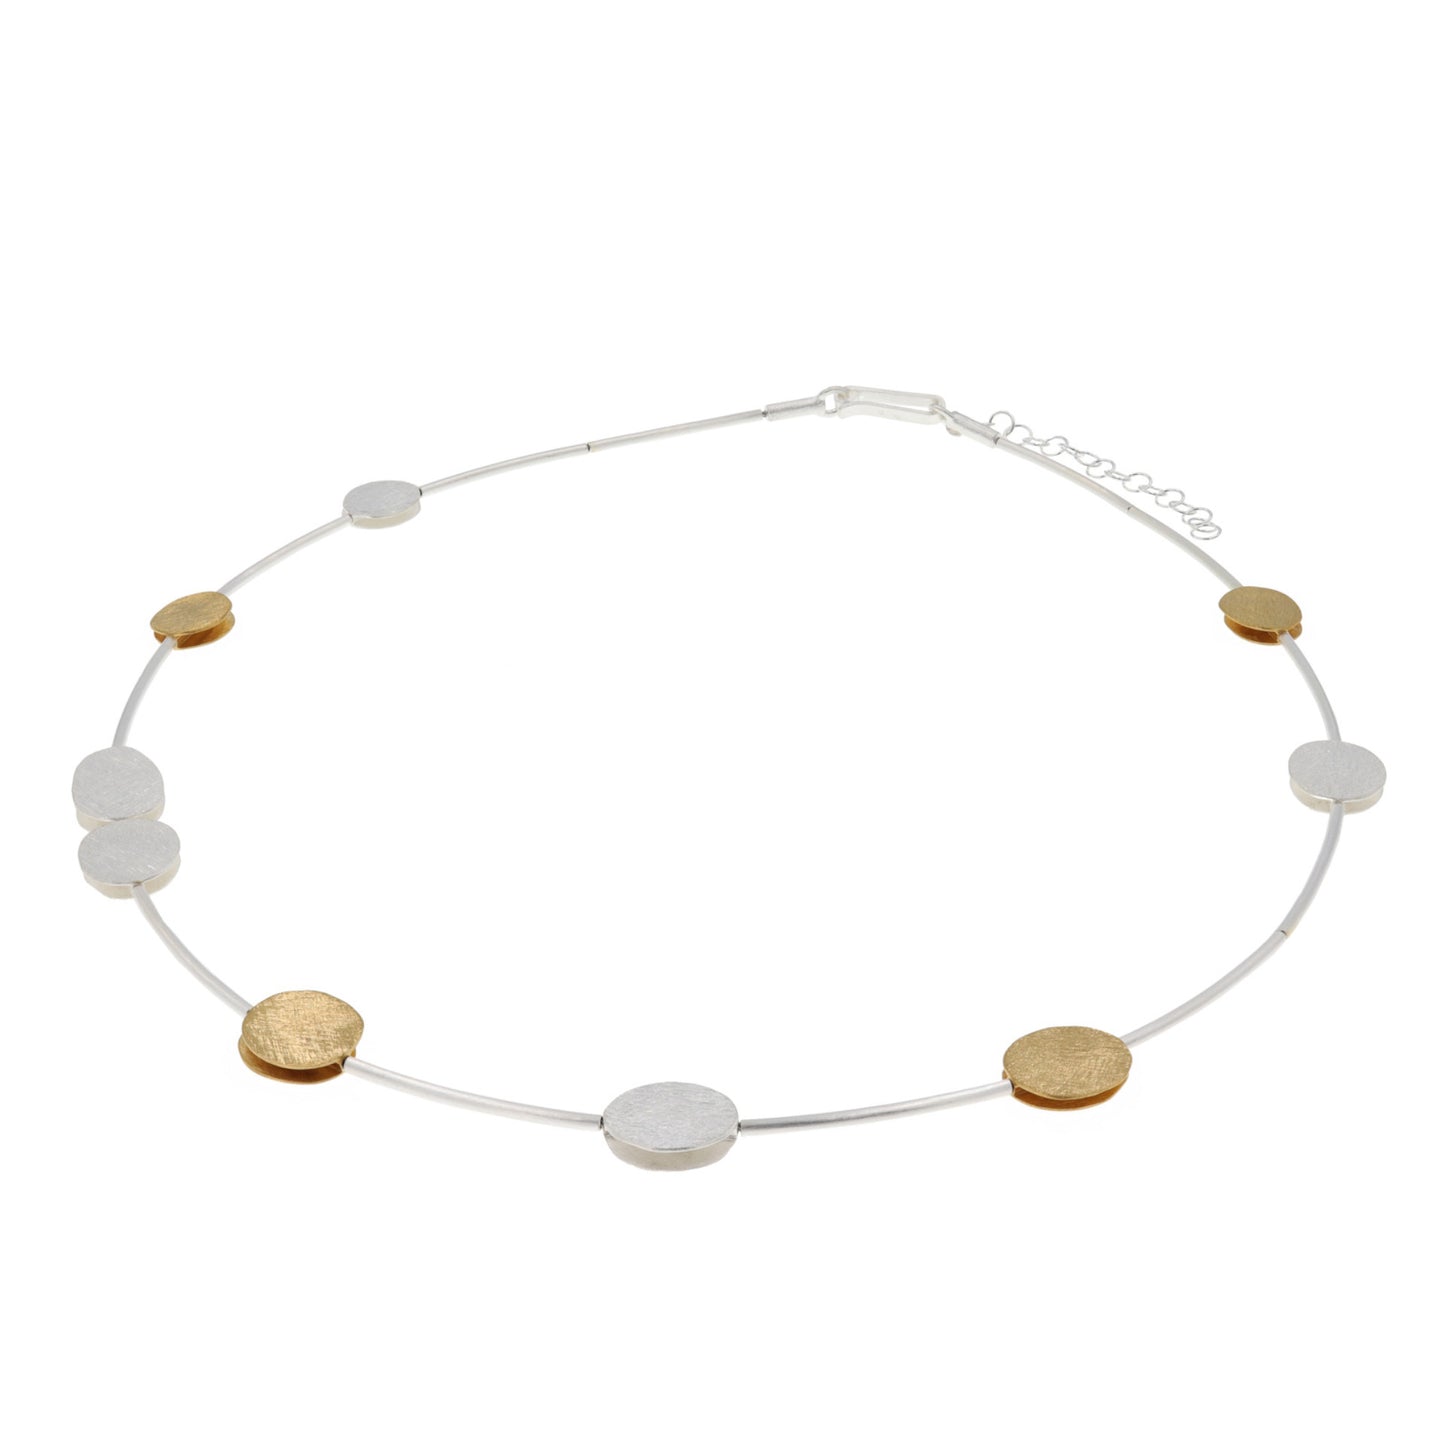 Gold Vermeil and White Silver Pebbles Necklet